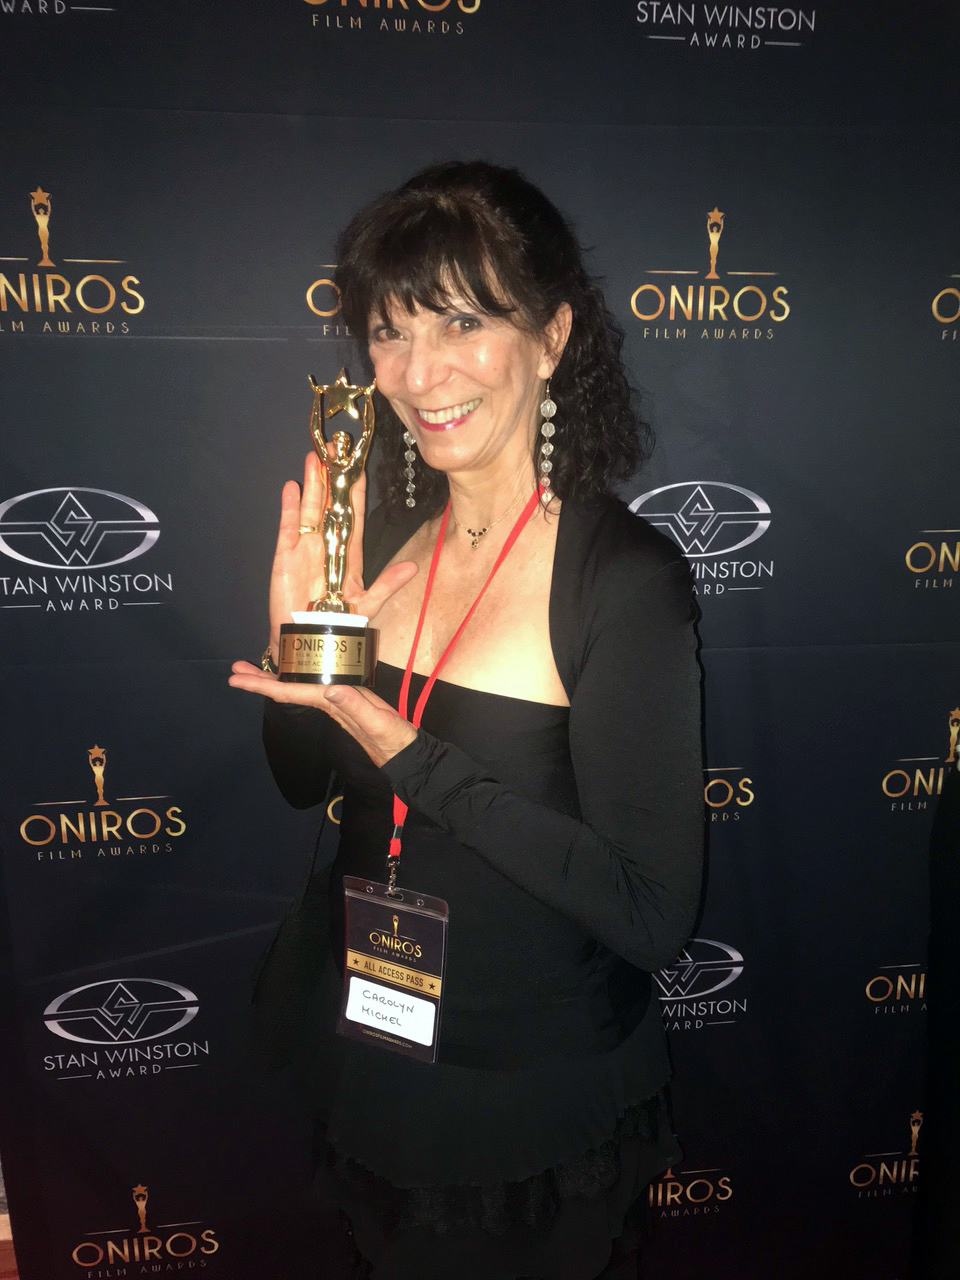 Carolyn Michel was awarded Best Actress of the Year at the Oniros Film Awards in Aosta, Italy, in August for her role as Tanya in the film “Katia.” Courtesy photo